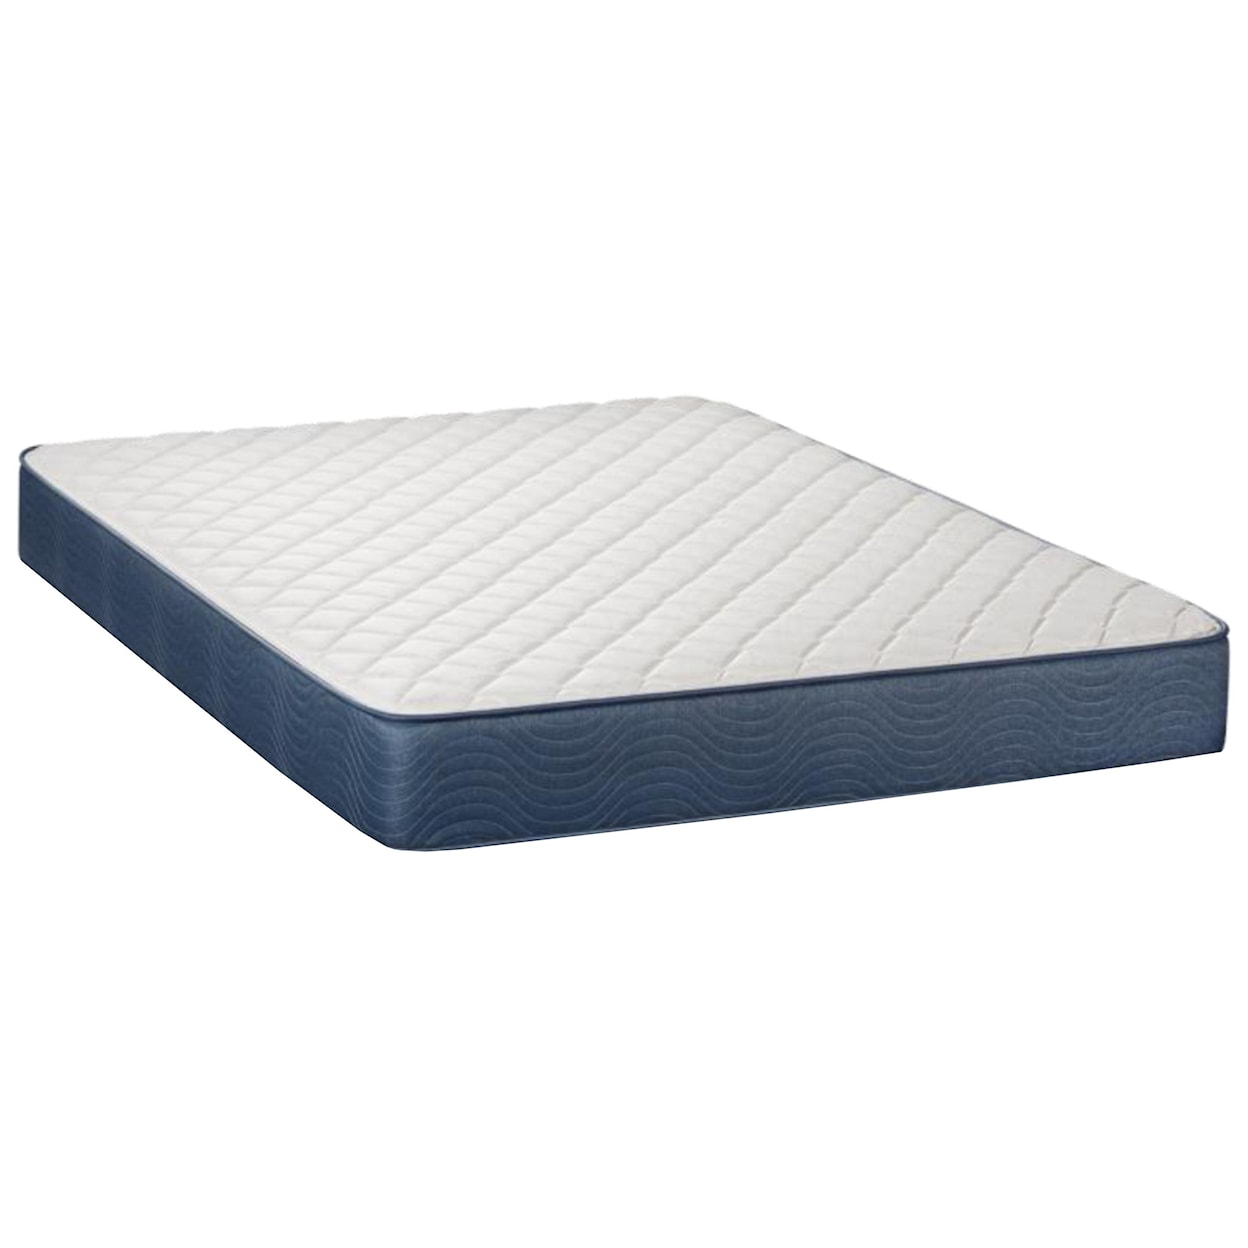 Restonic Sumner Firm Twin XL 9" Firm Two Sided Mattress